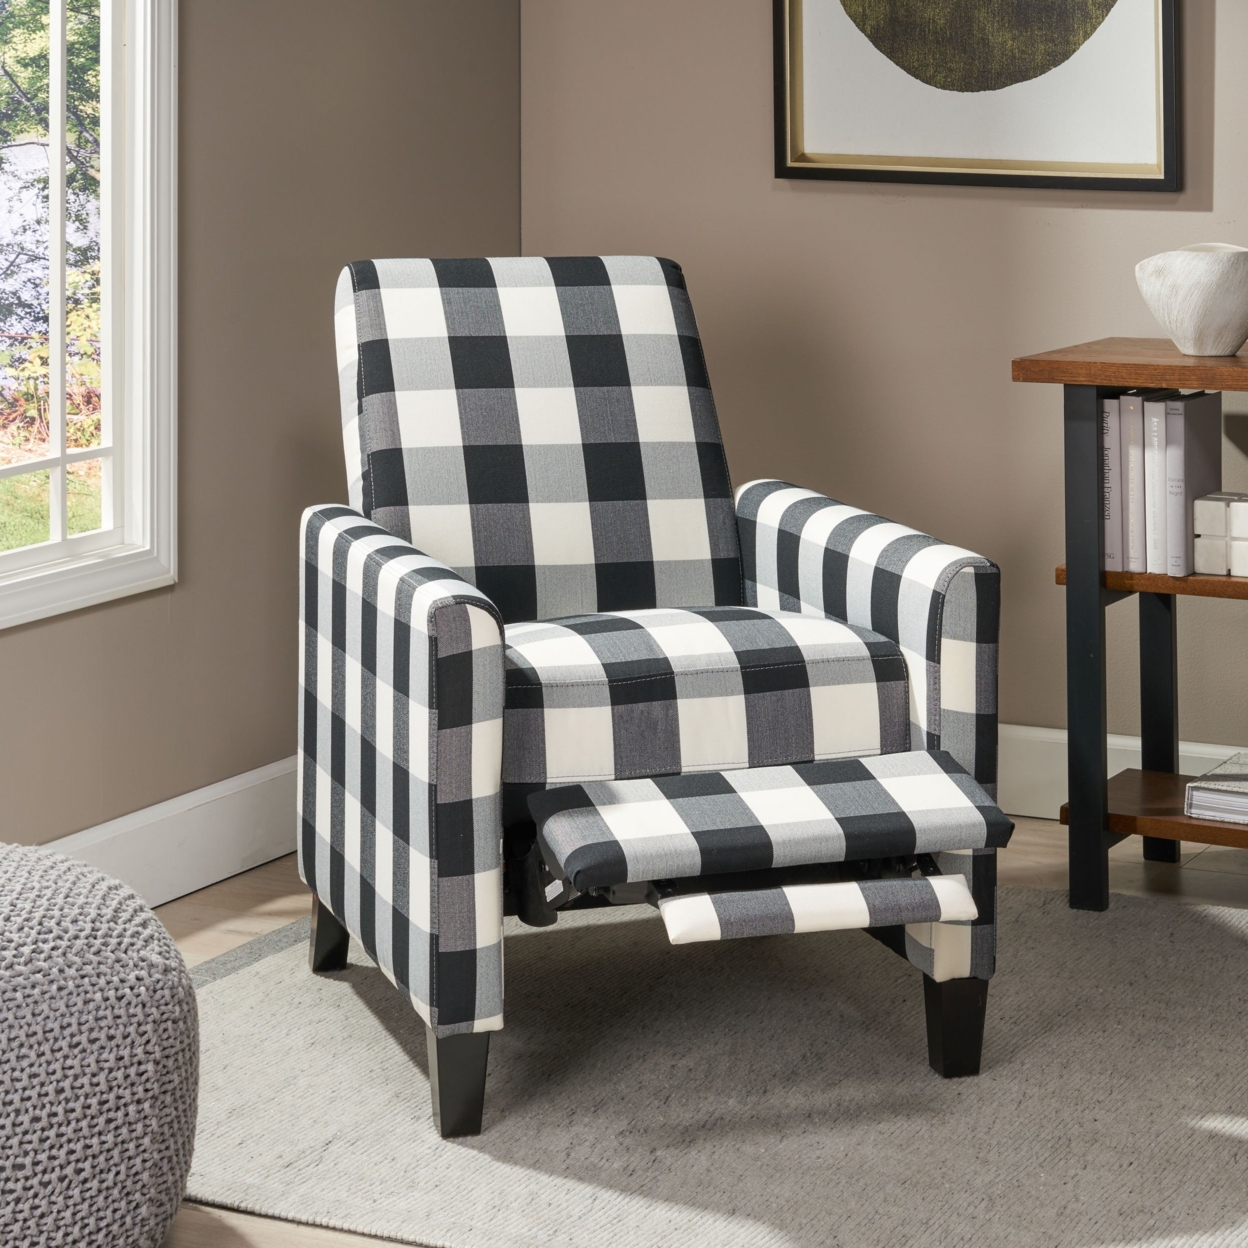 Nayan Contemporary Fabric Upholstered Push Back Recliner - Black Checkerboard